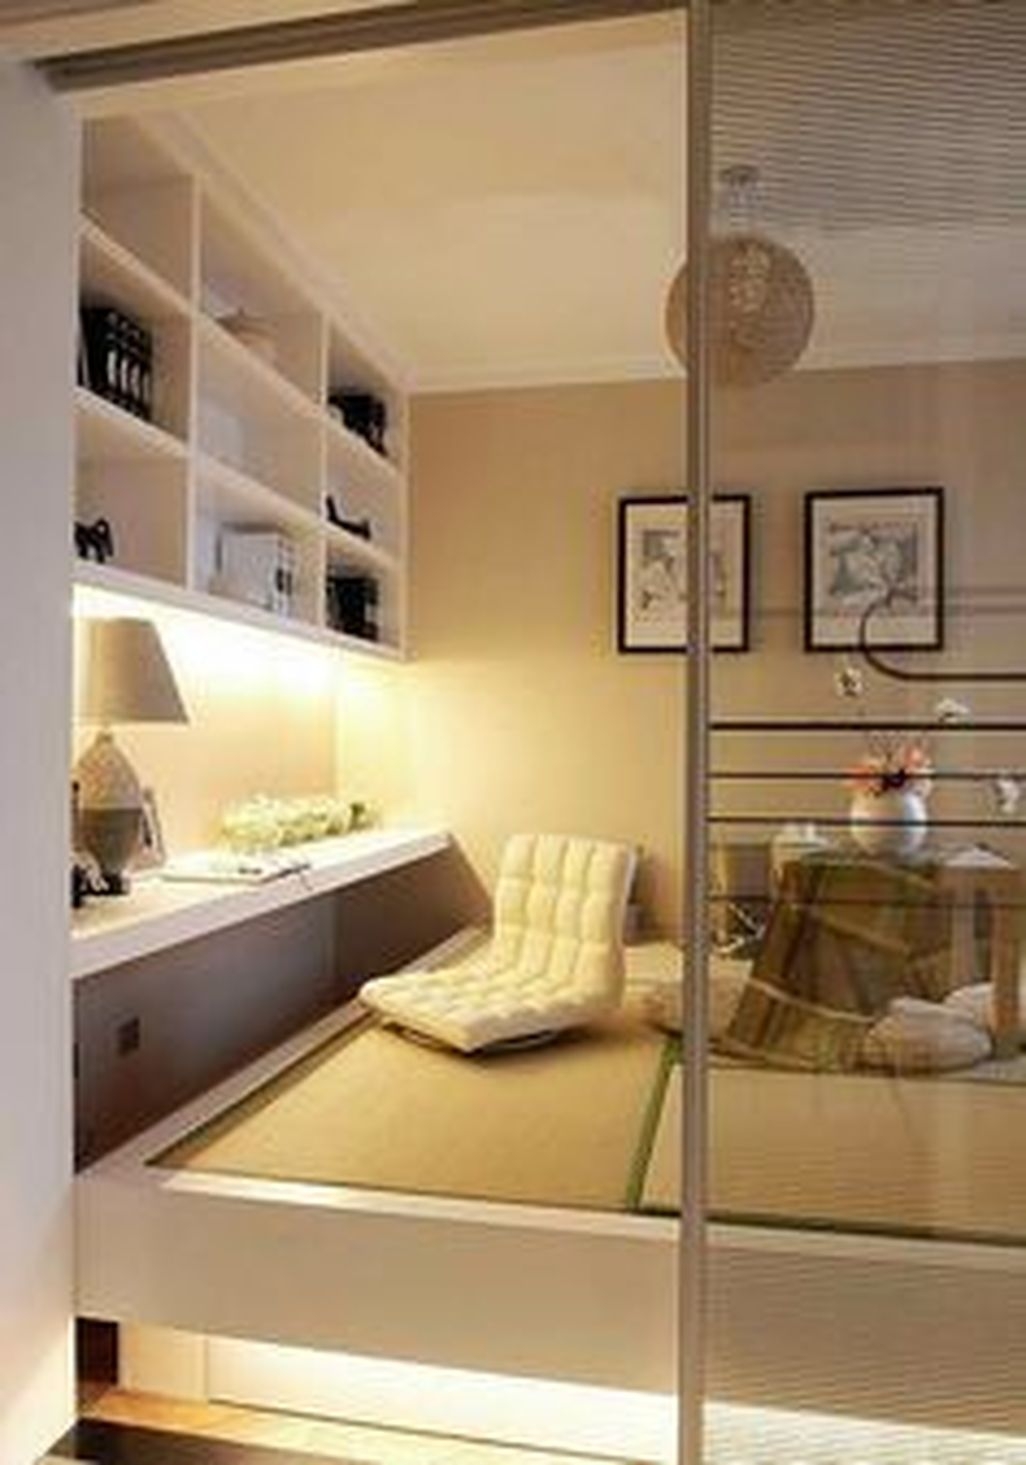 Modern But Simple Japanese  Styled Bedroom  Design  Ideas 15 